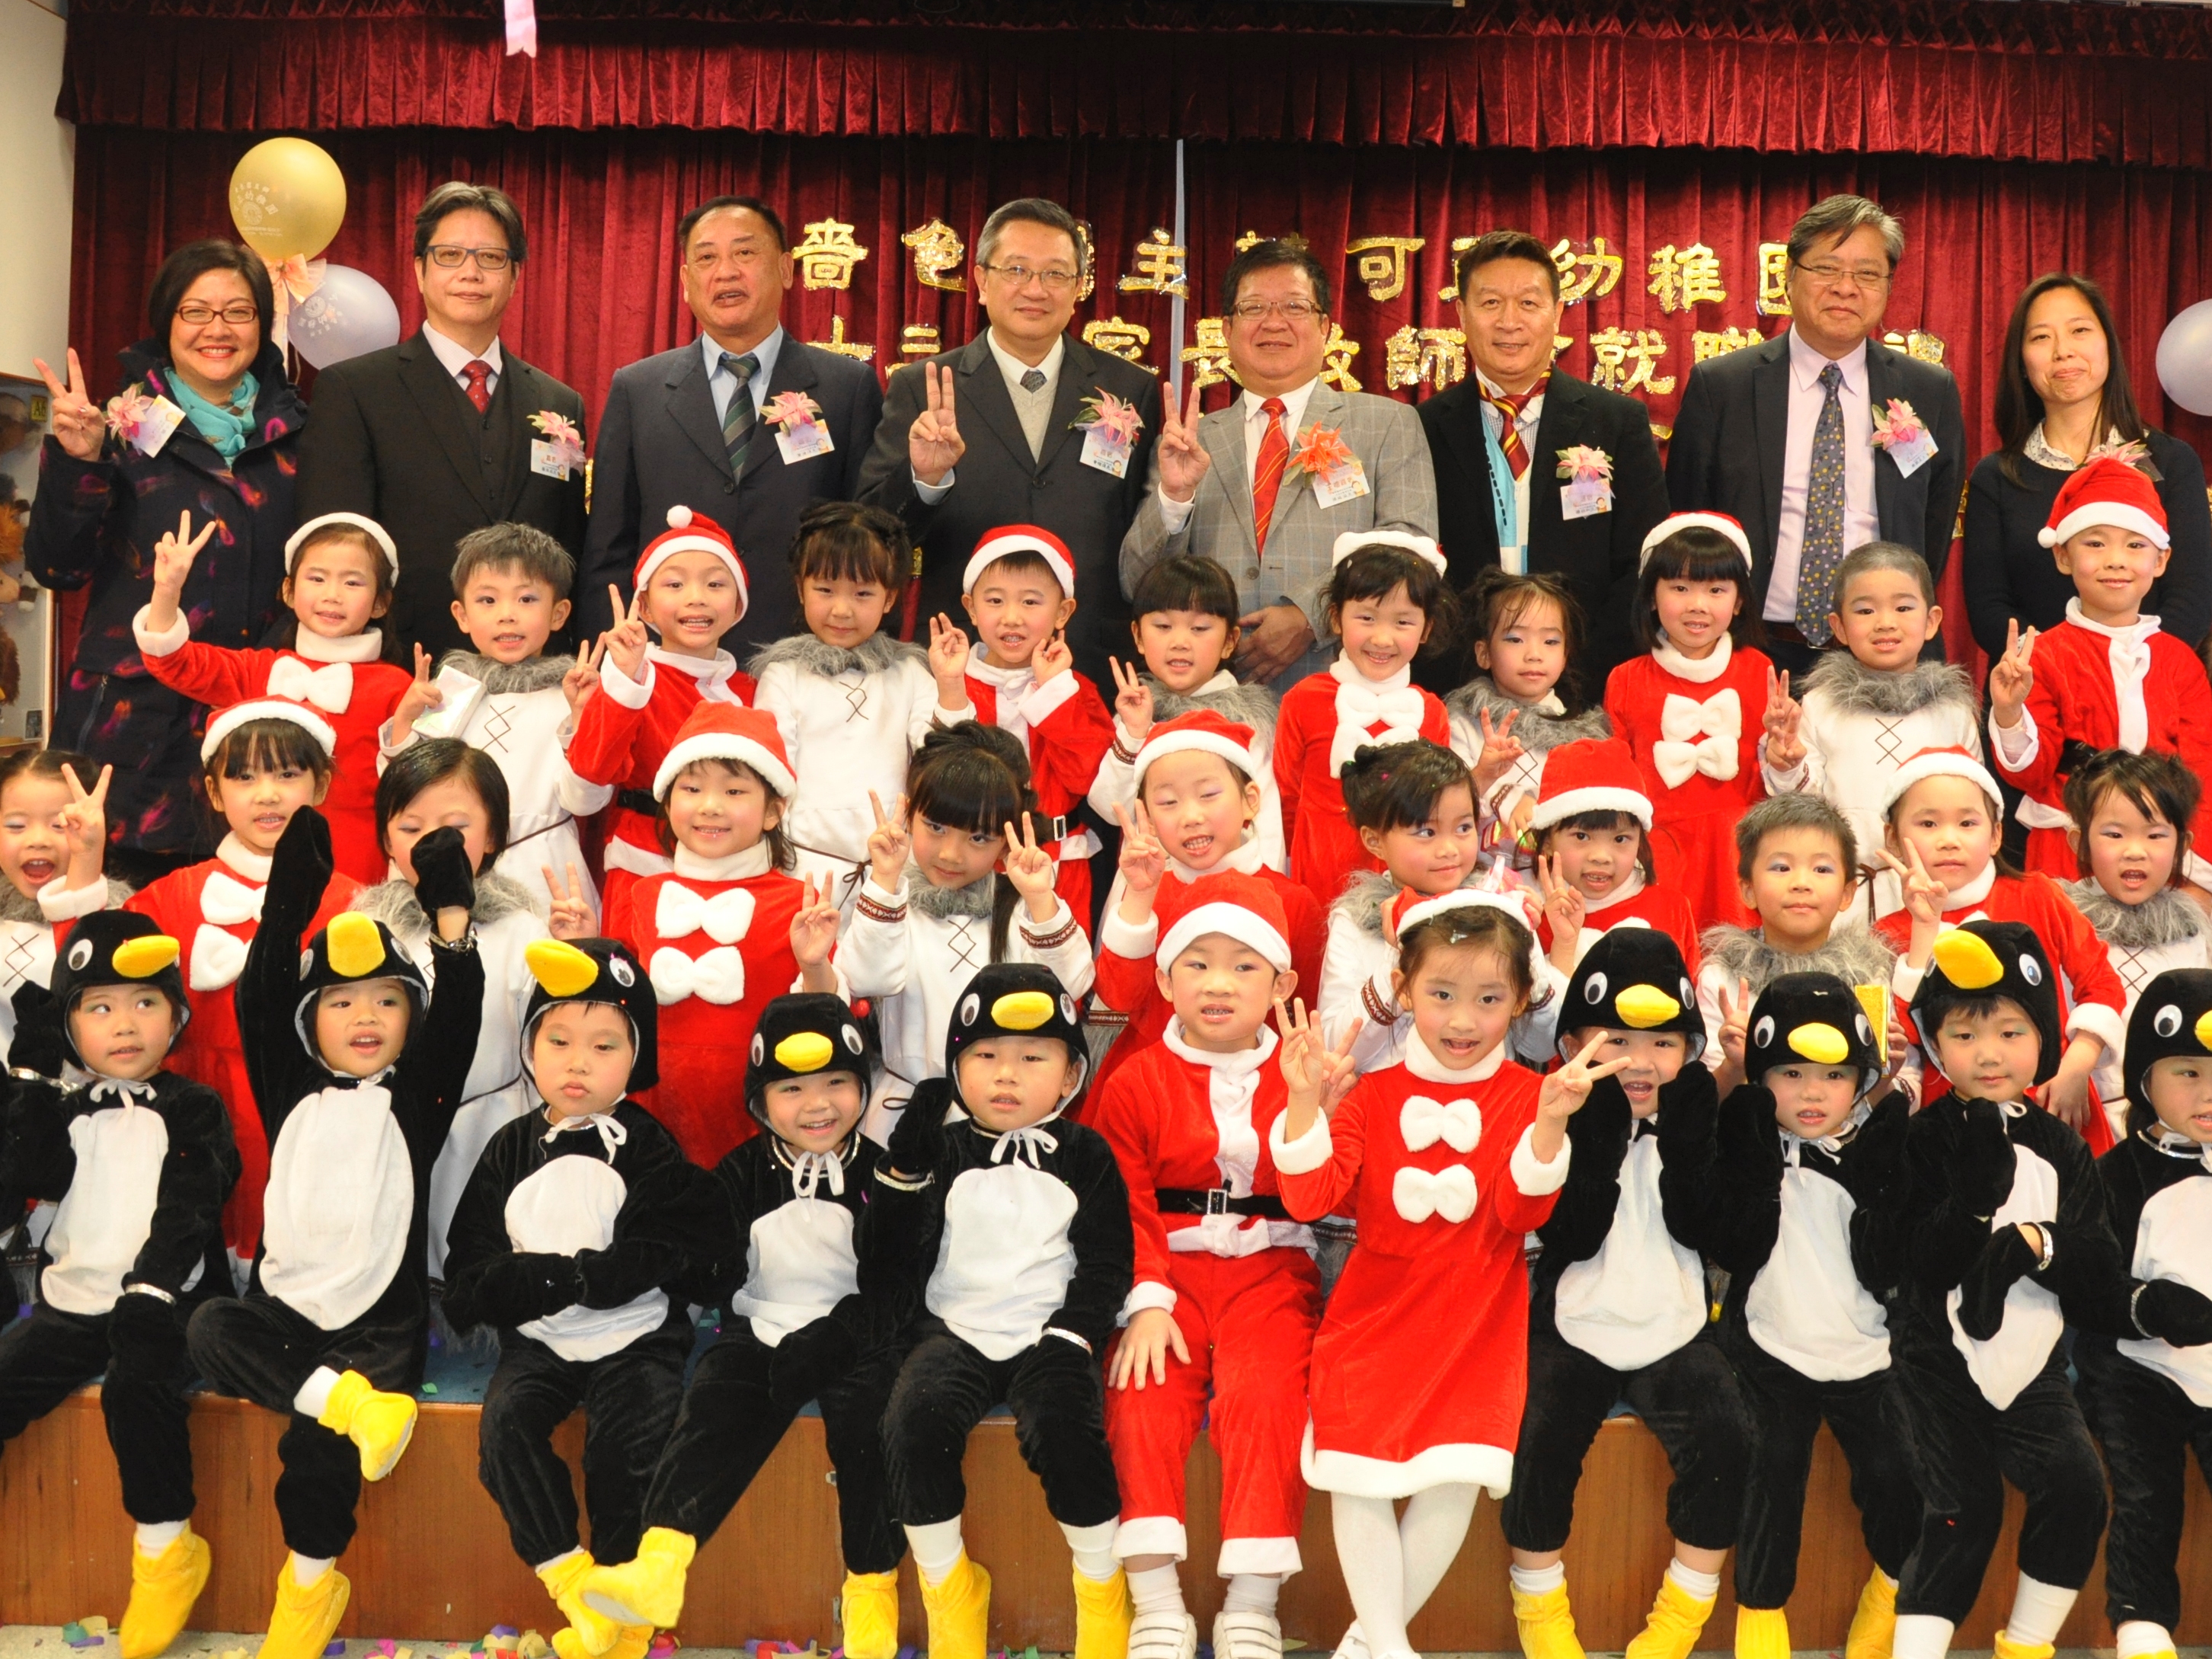 Inauguration Ceremony of the 13th Parent-Teacher Association of SSY Ho Ching Kindergarten